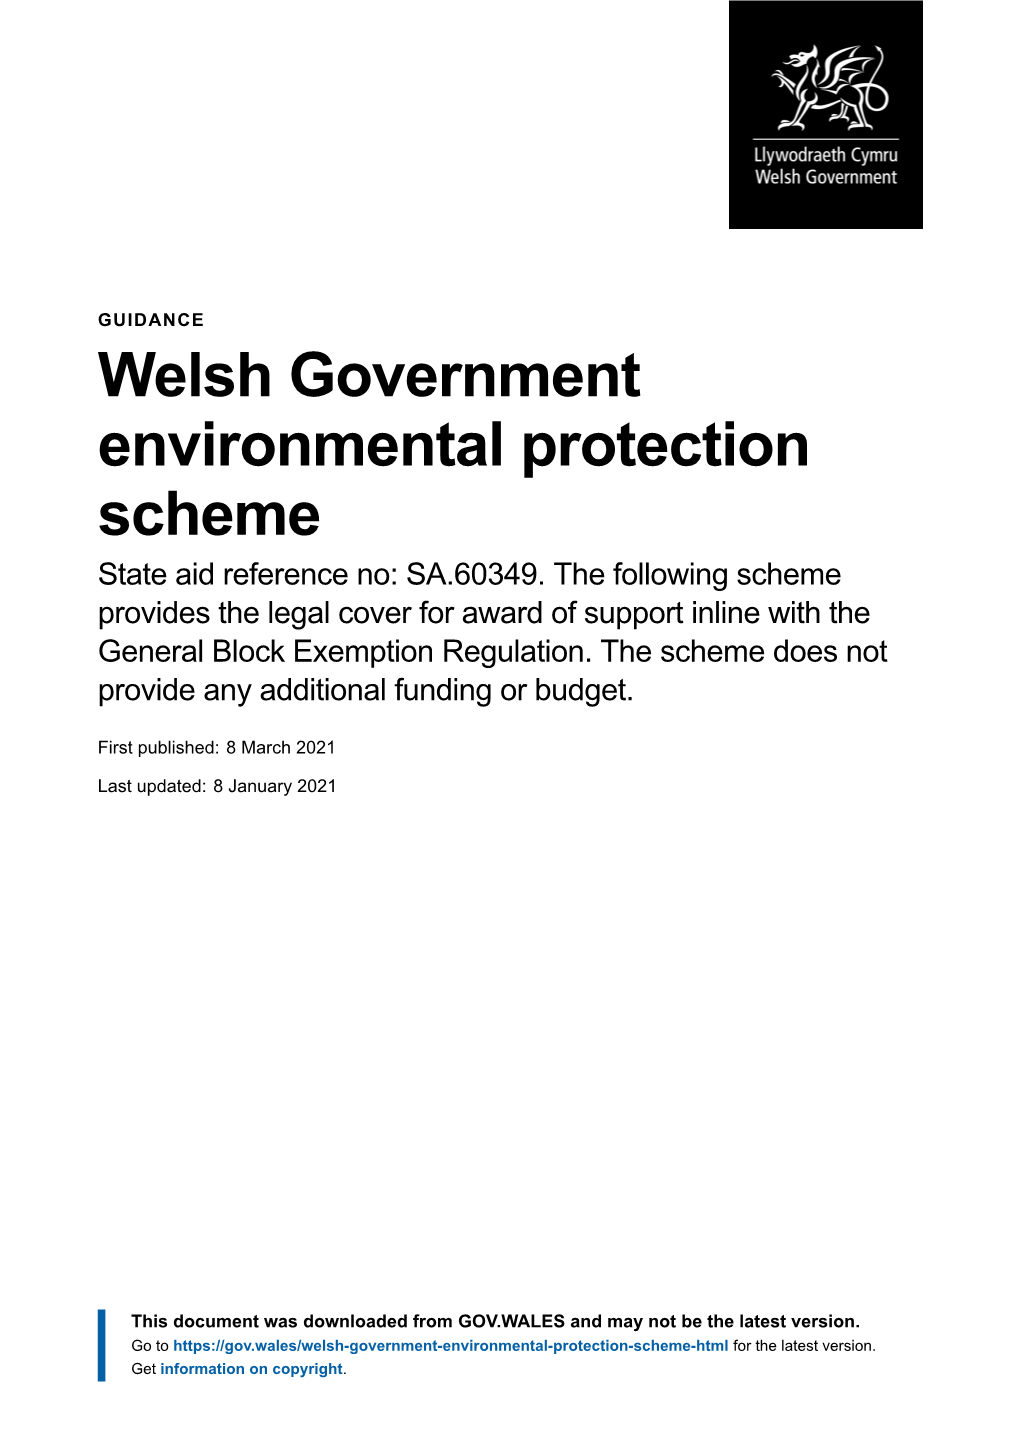 Welsh Government Environmental Protection Scheme | GOV.WALES